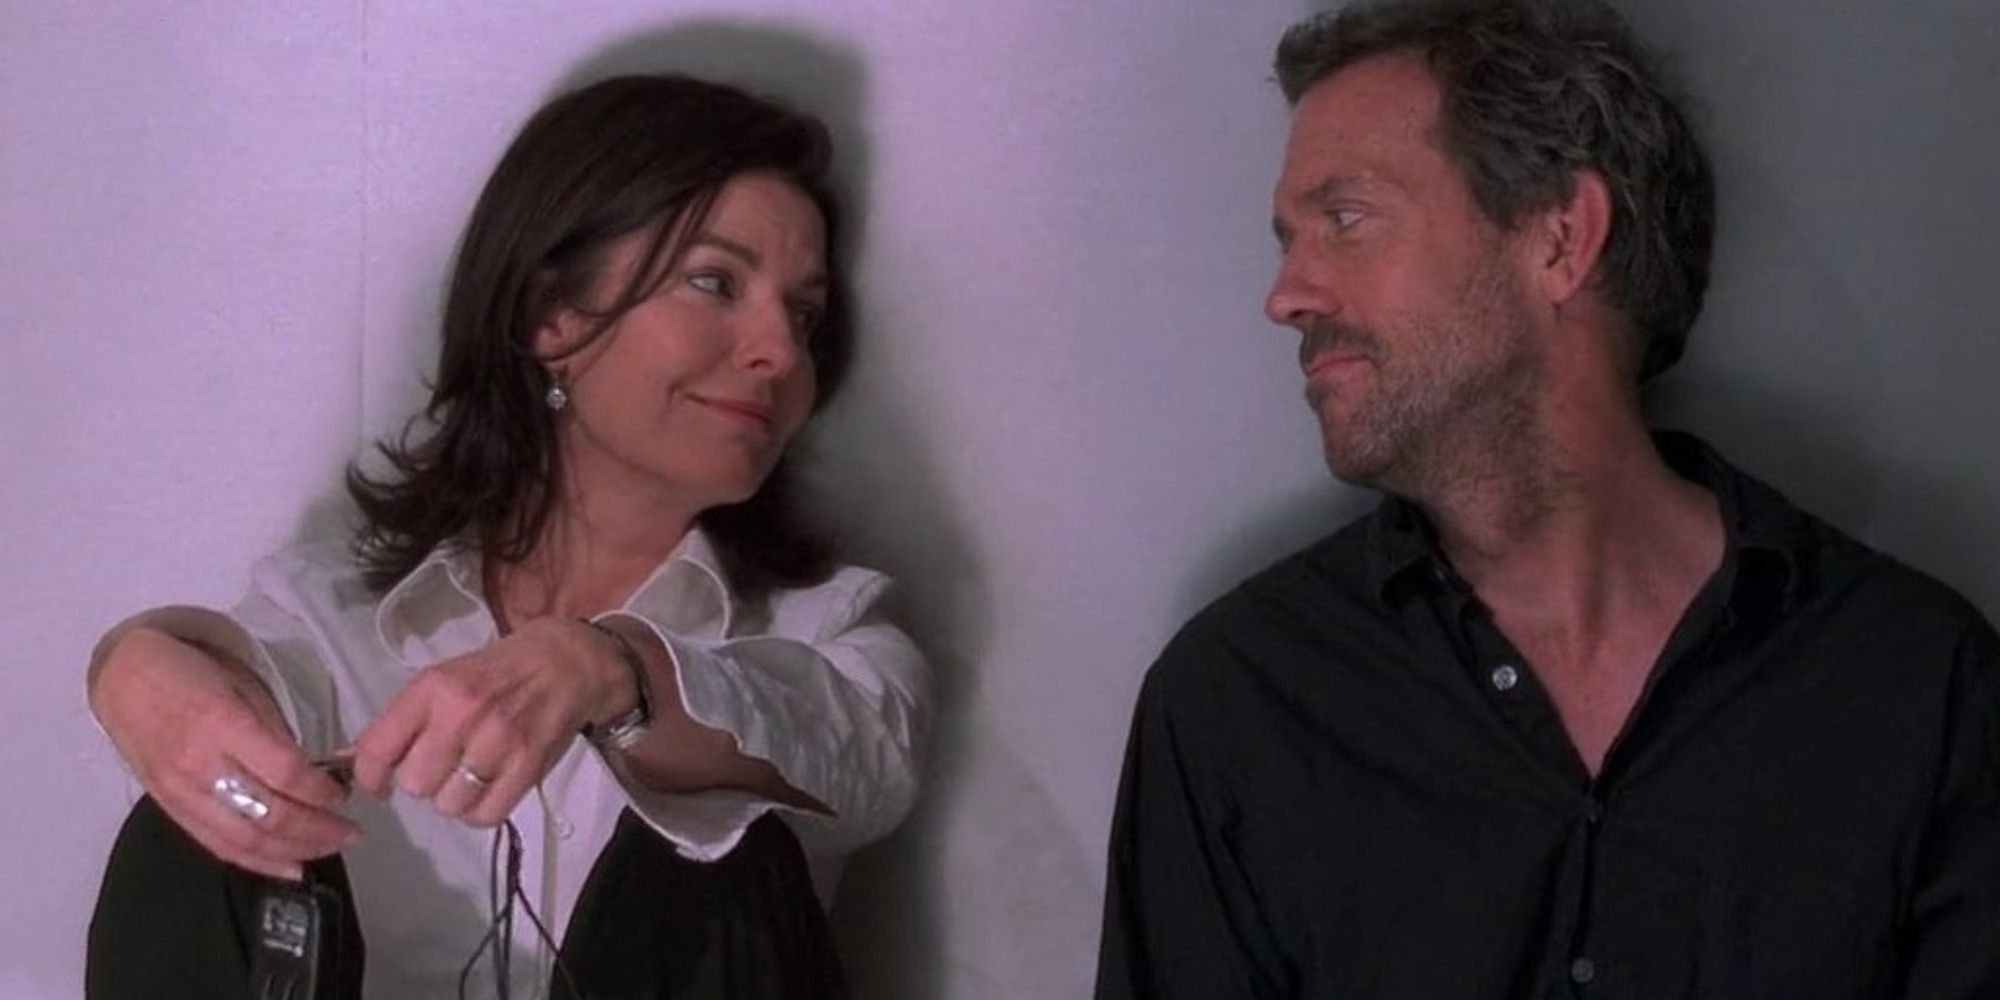 Stacy and House smiling at each other